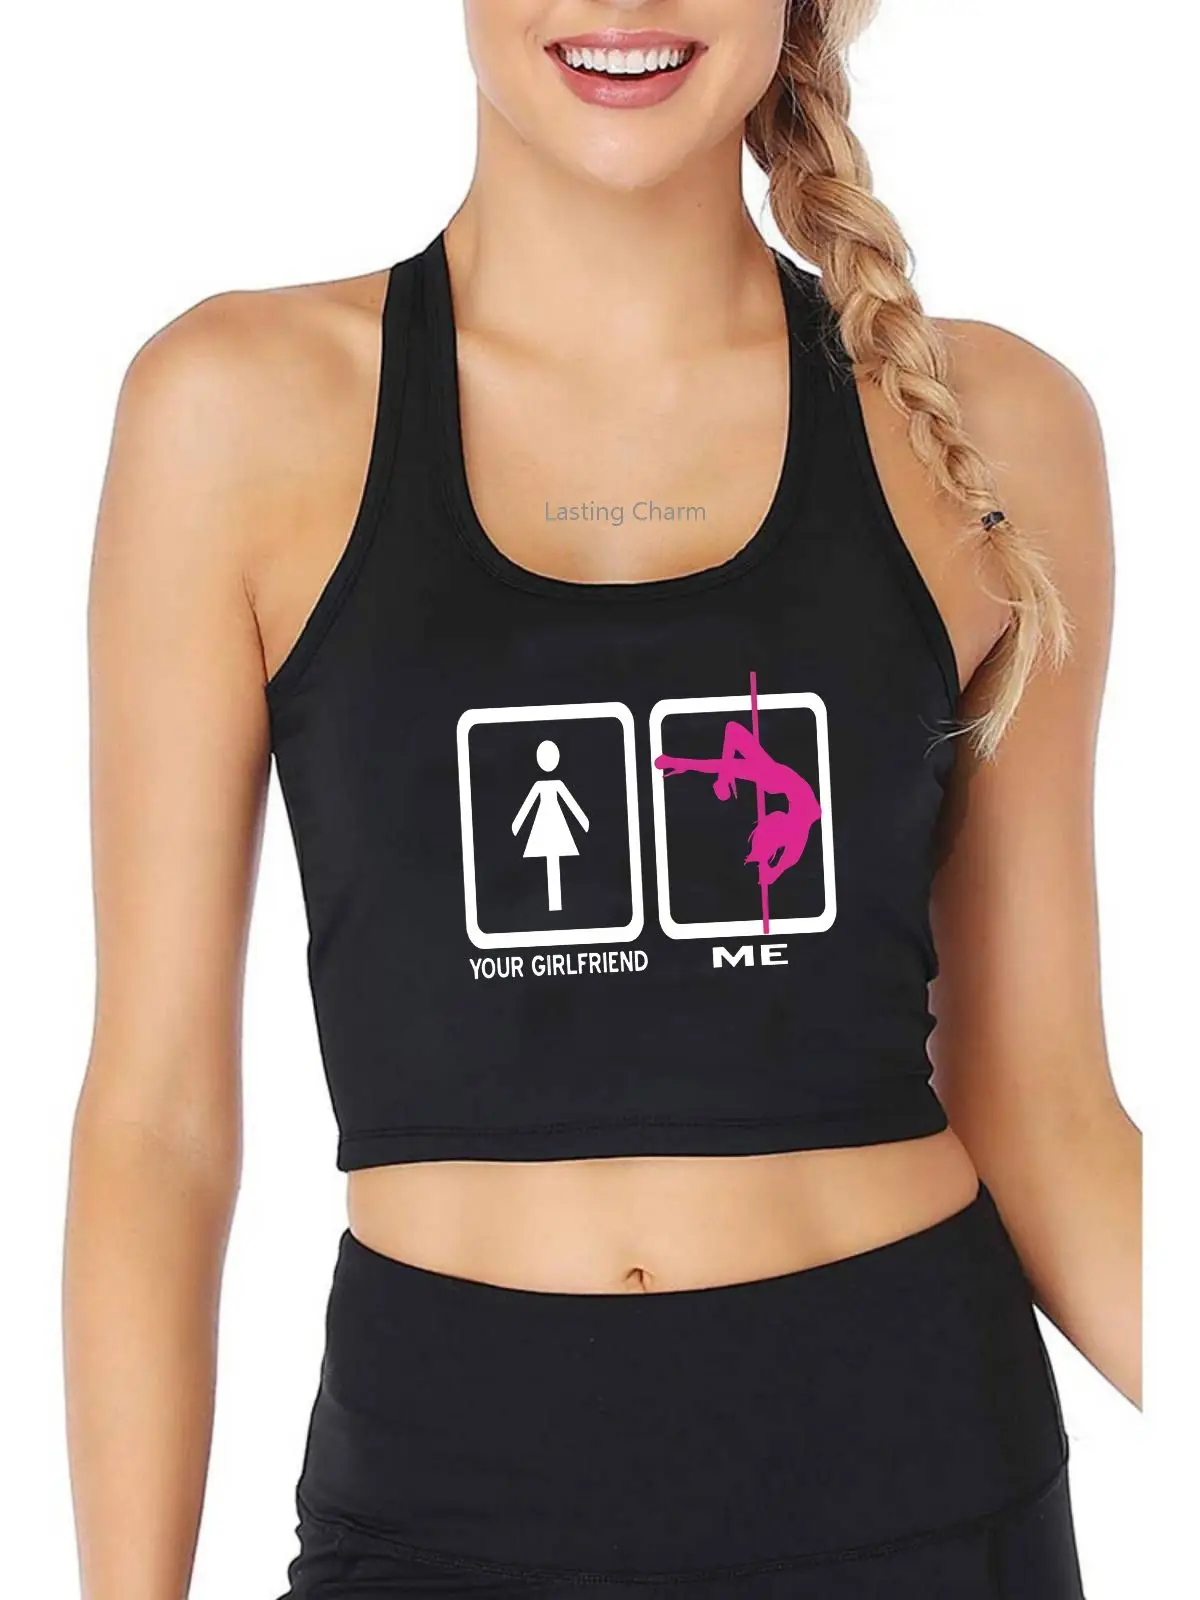 

Comparison chart your girlfriend and me Pattern Tank Top Pole Dancer Humor Fun Print Yoga Sports Workout Crop Top Gym Tops